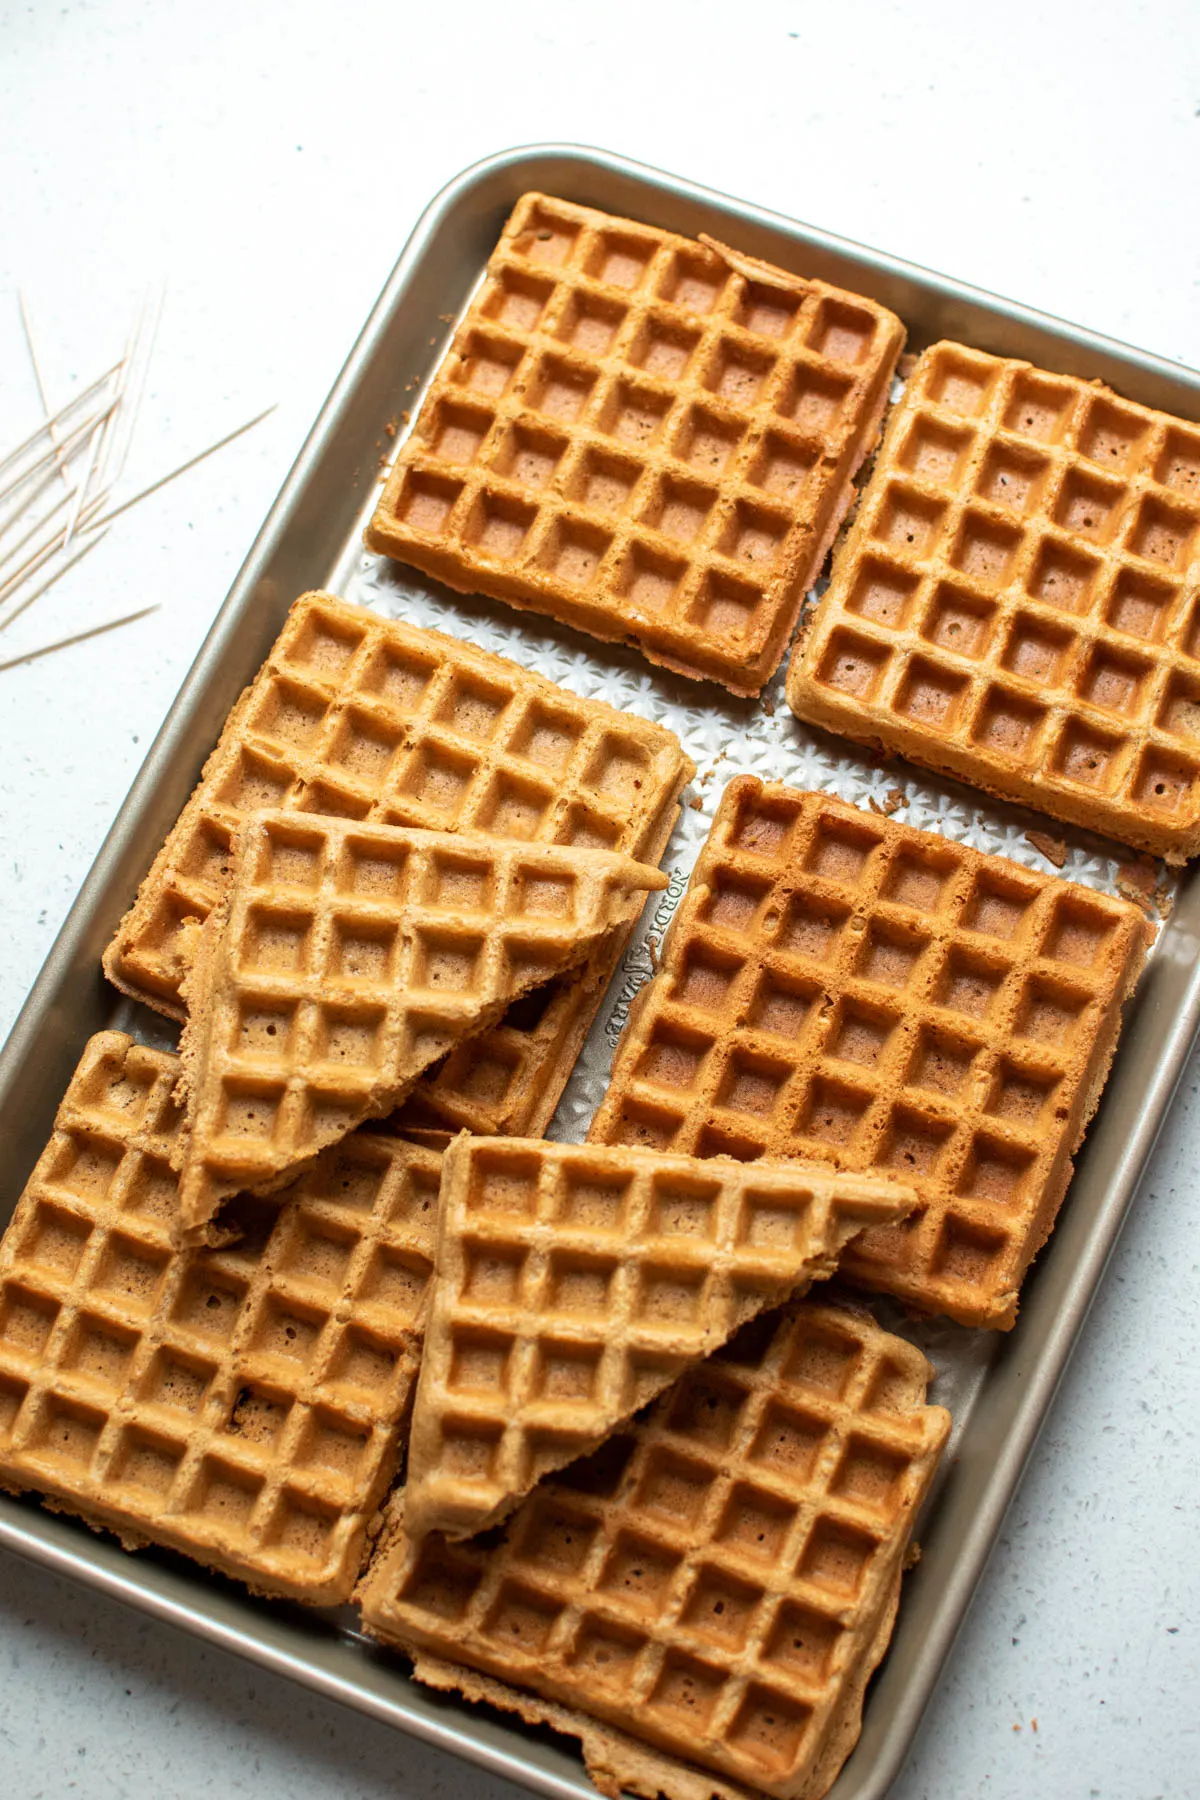 Large metal baking sheet with several gingerbread waffles and toothpicks, all on countertop.